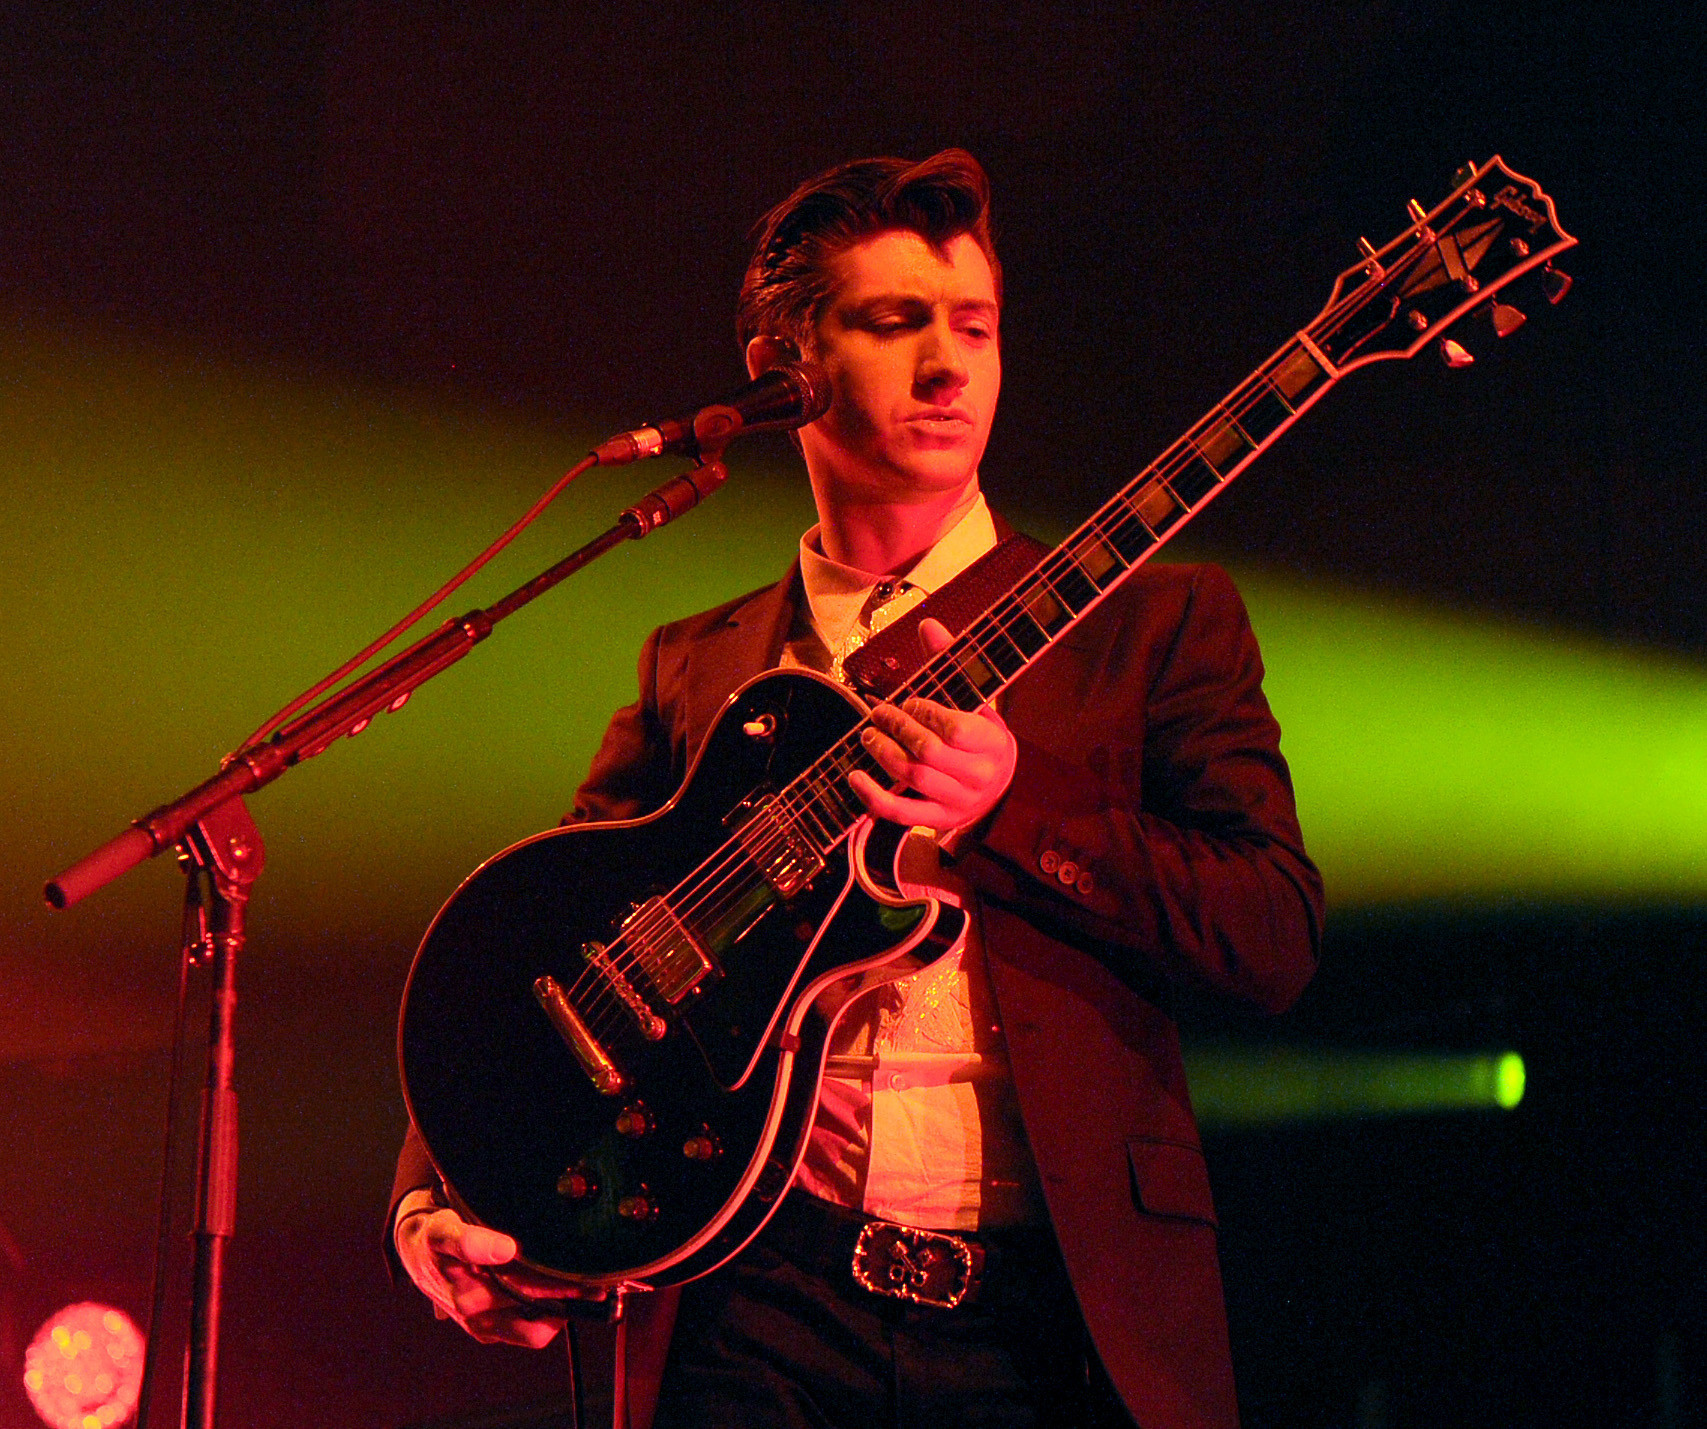 The Arctic Monkeys, with lead singer Alex Turner, are among the acts to have played at Birmingham's National Indoor Arena over the past 25 years but athletics has also built up its list of stellar entertainers ©Getty Images 